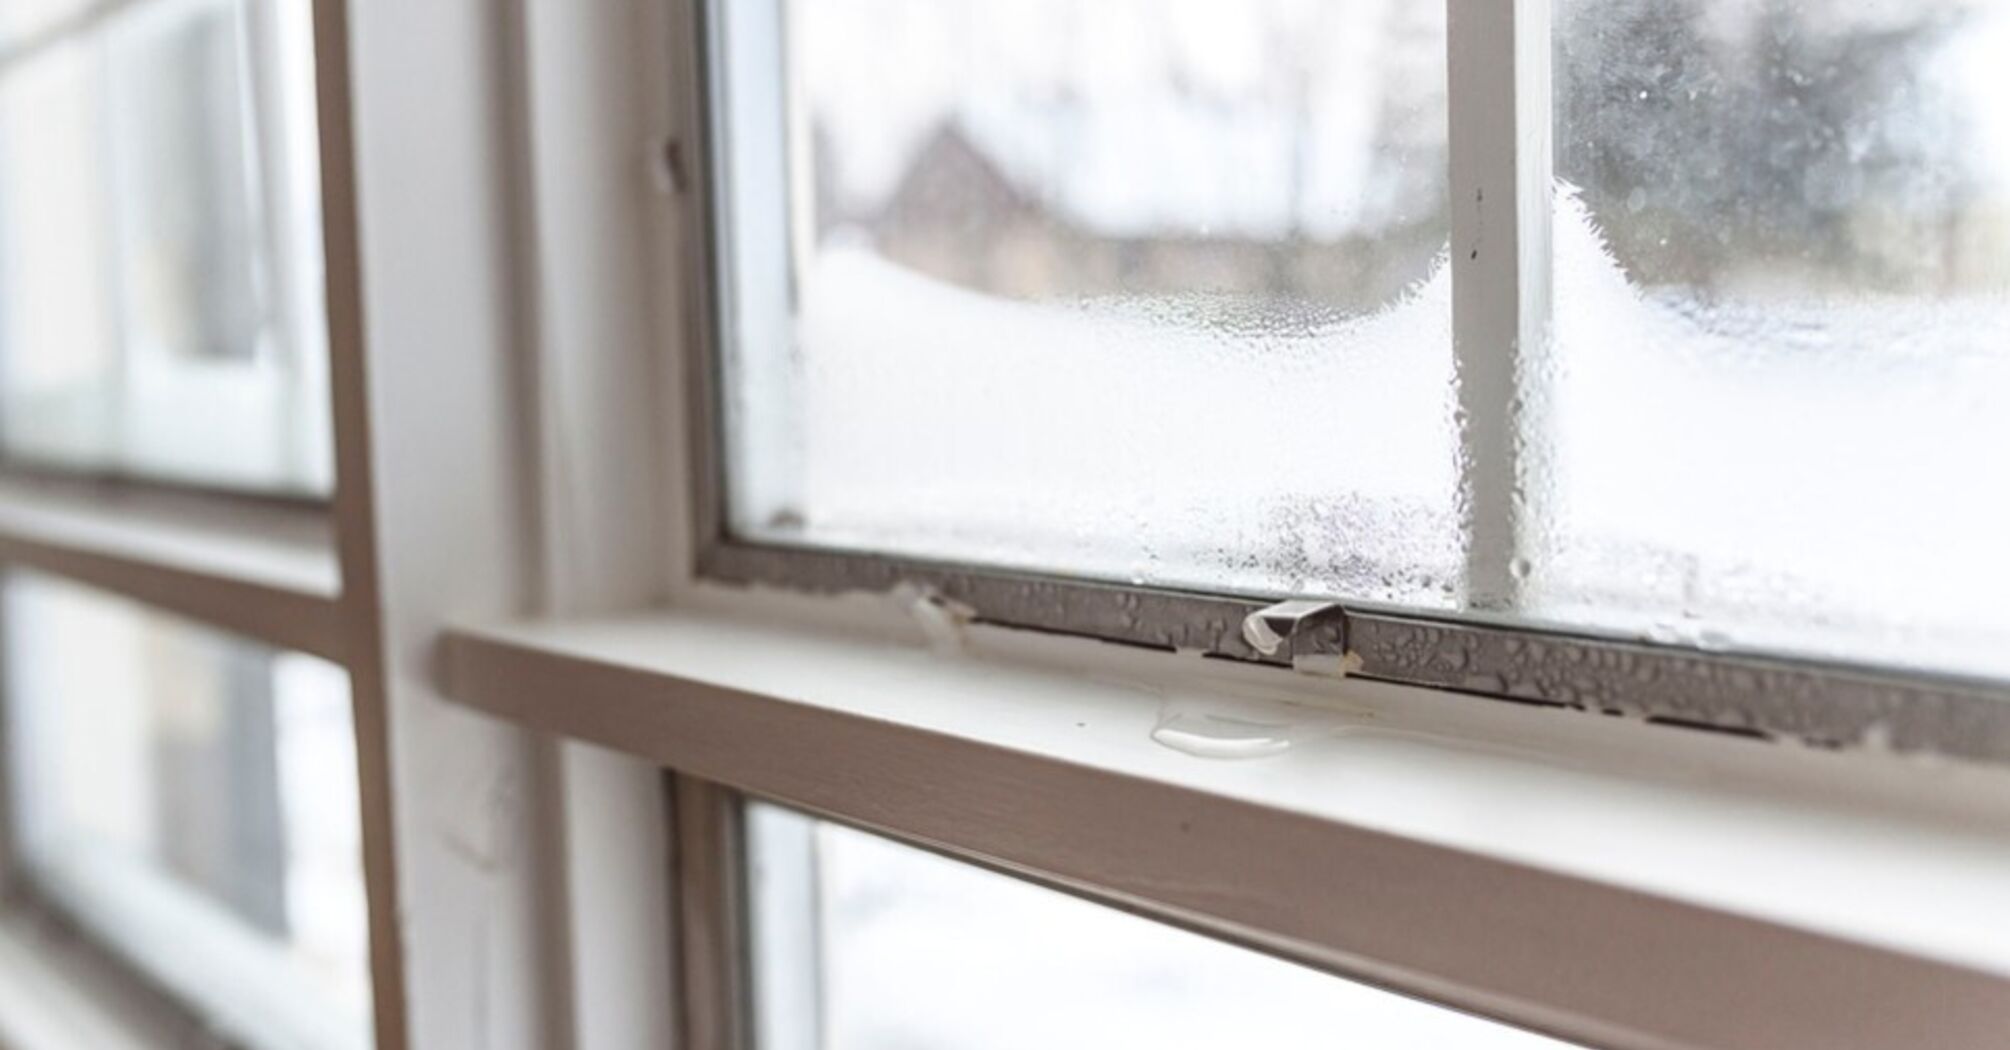 How to prevent plastic windows from fogging up